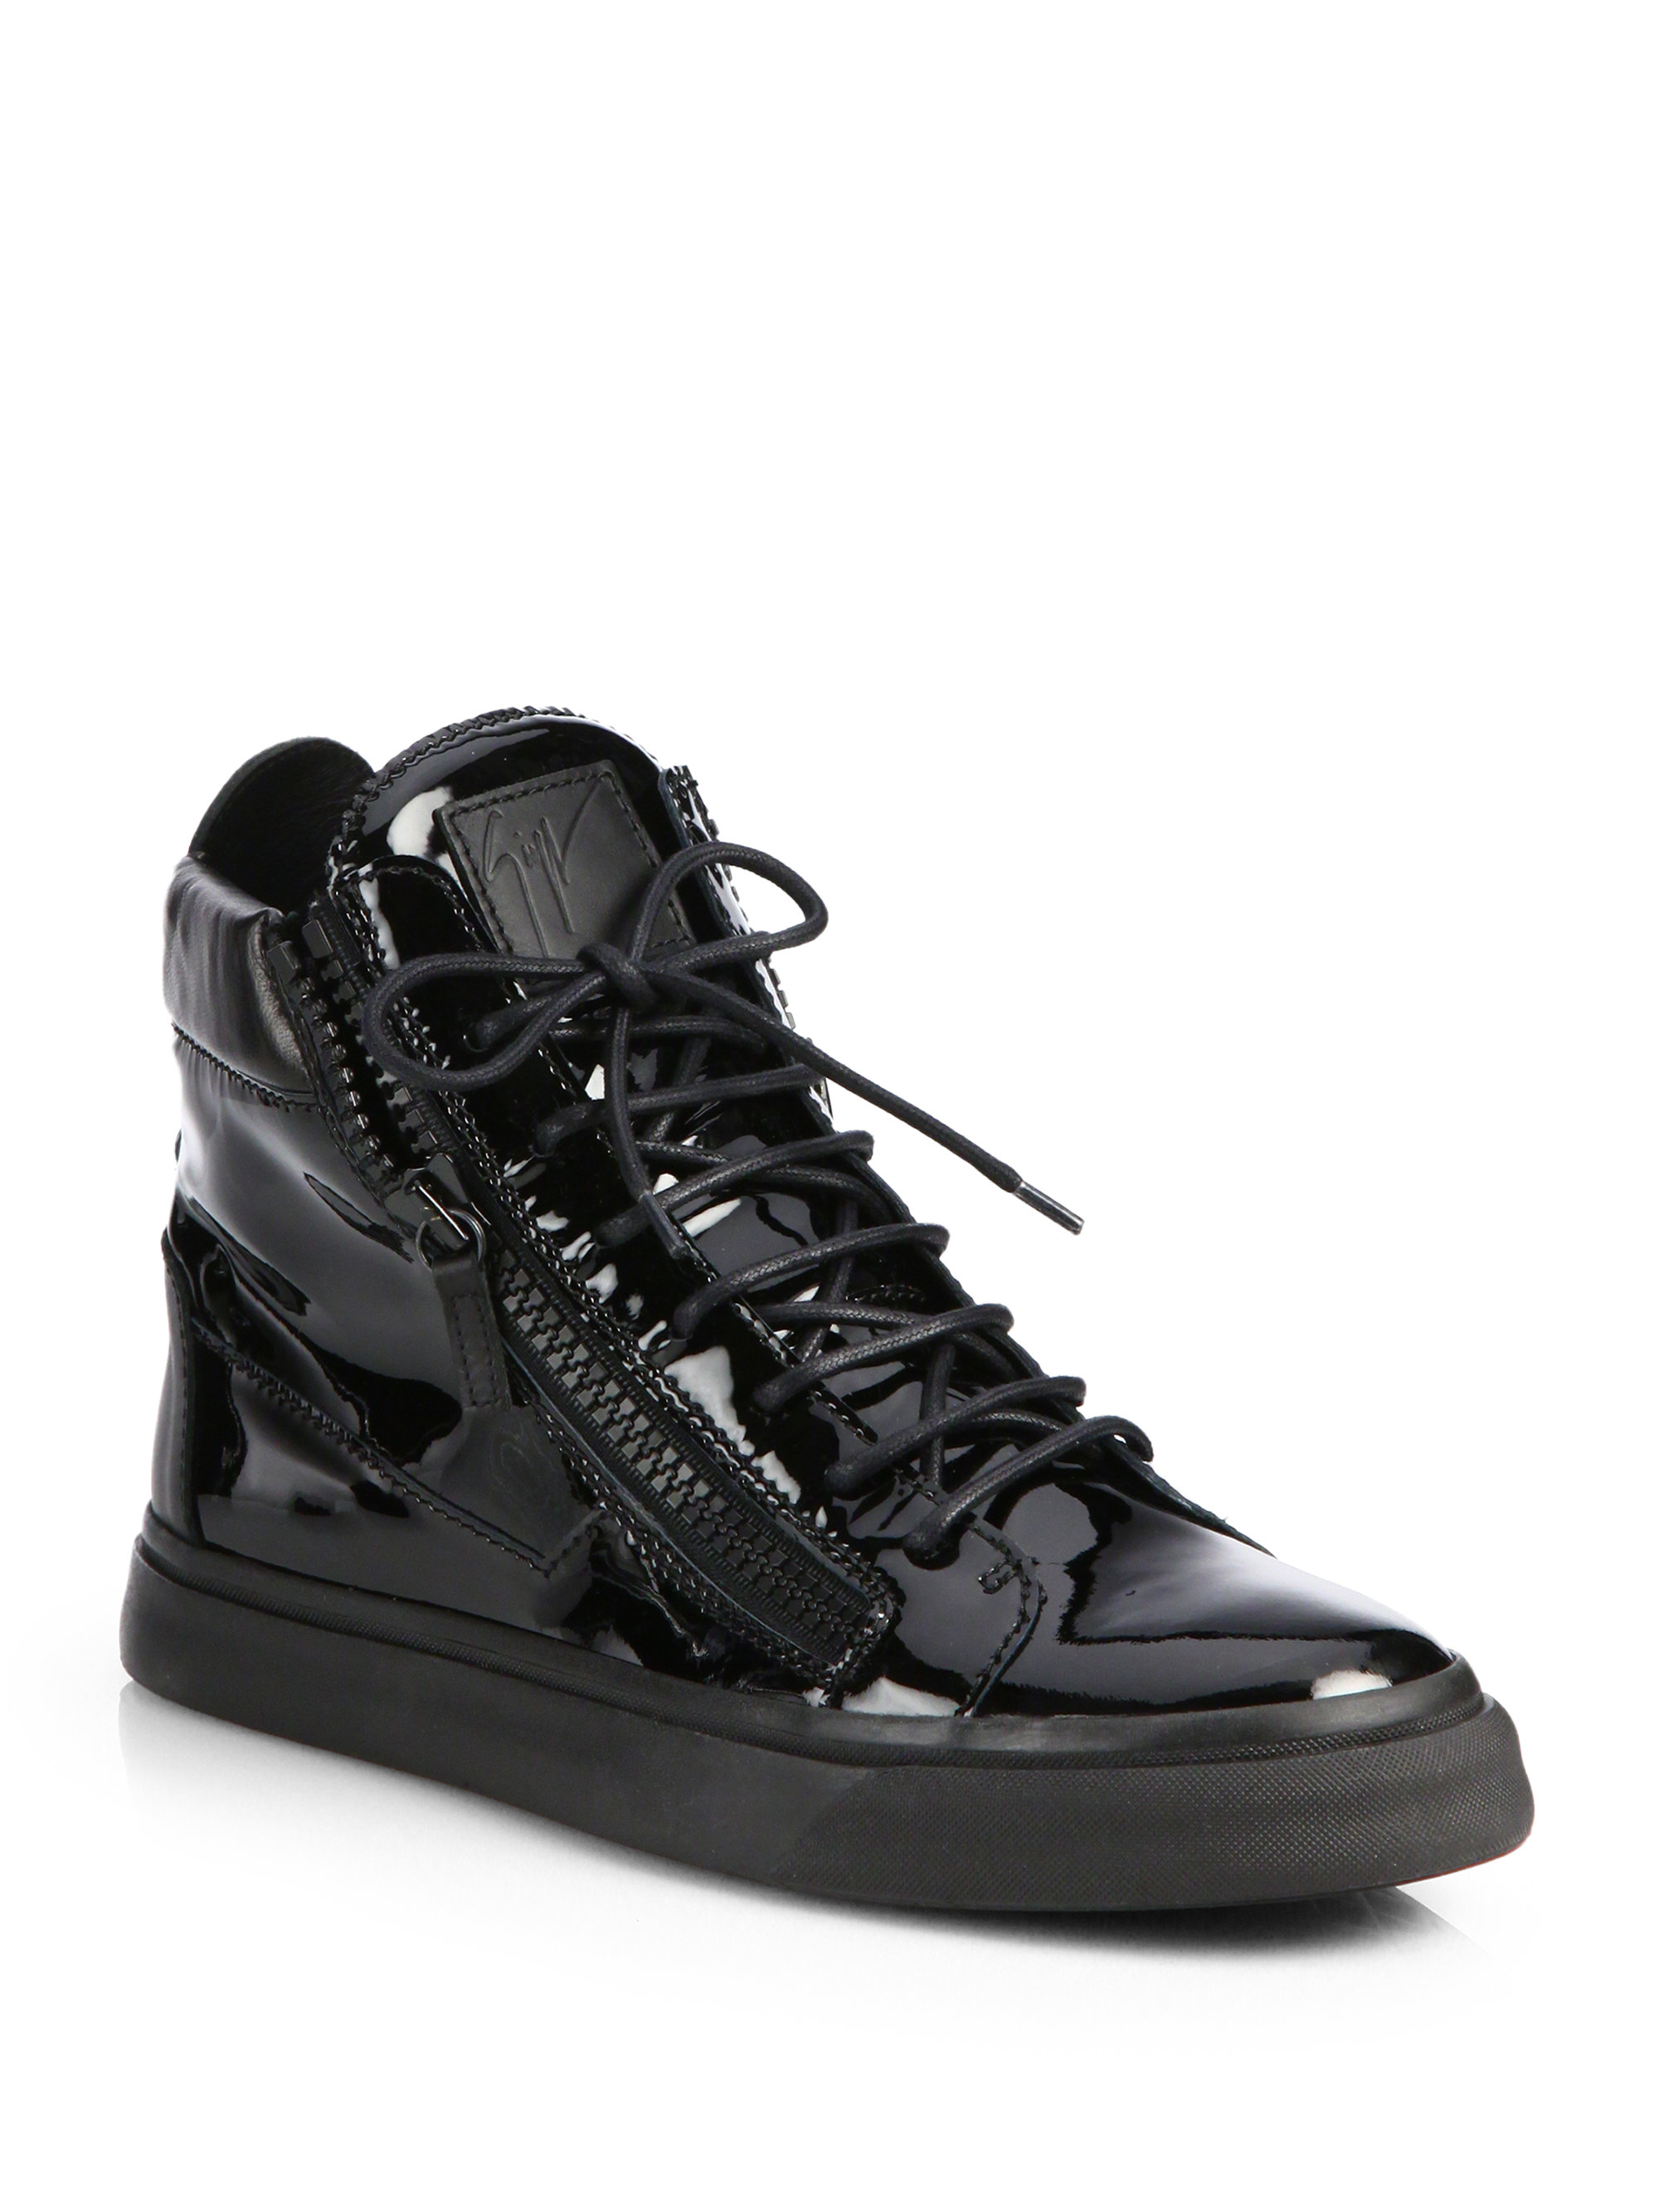 Giuseppe zanotti Leather And Mesh High-top Sneakers in Black for Men | Lyst